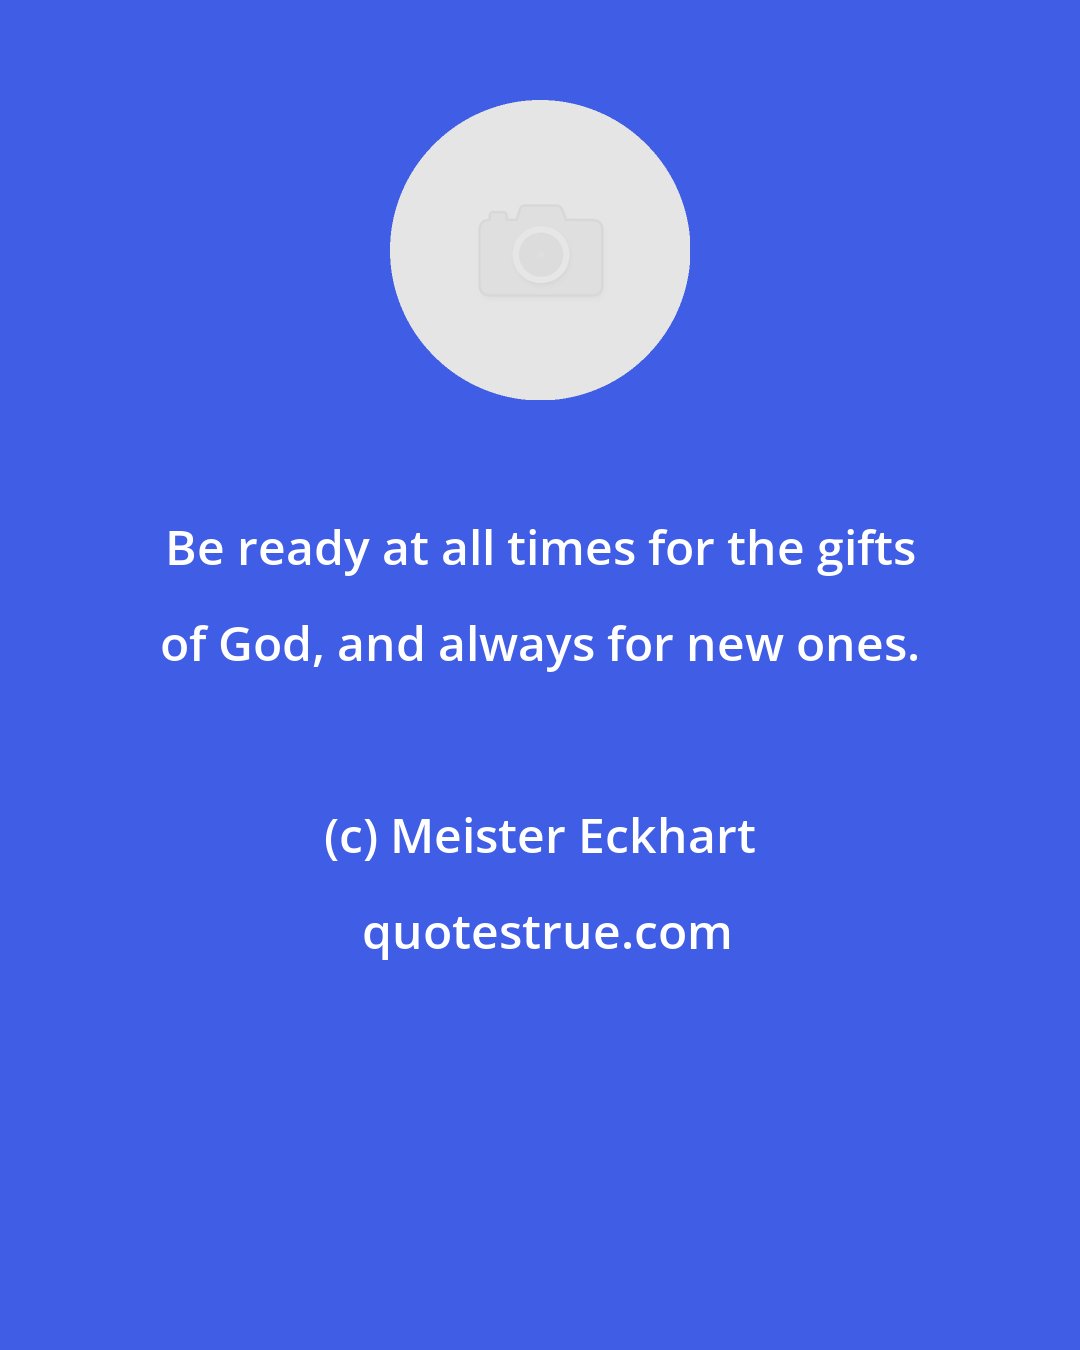 Meister Eckhart: Be ready at all times for the gifts of God, and always for new ones.